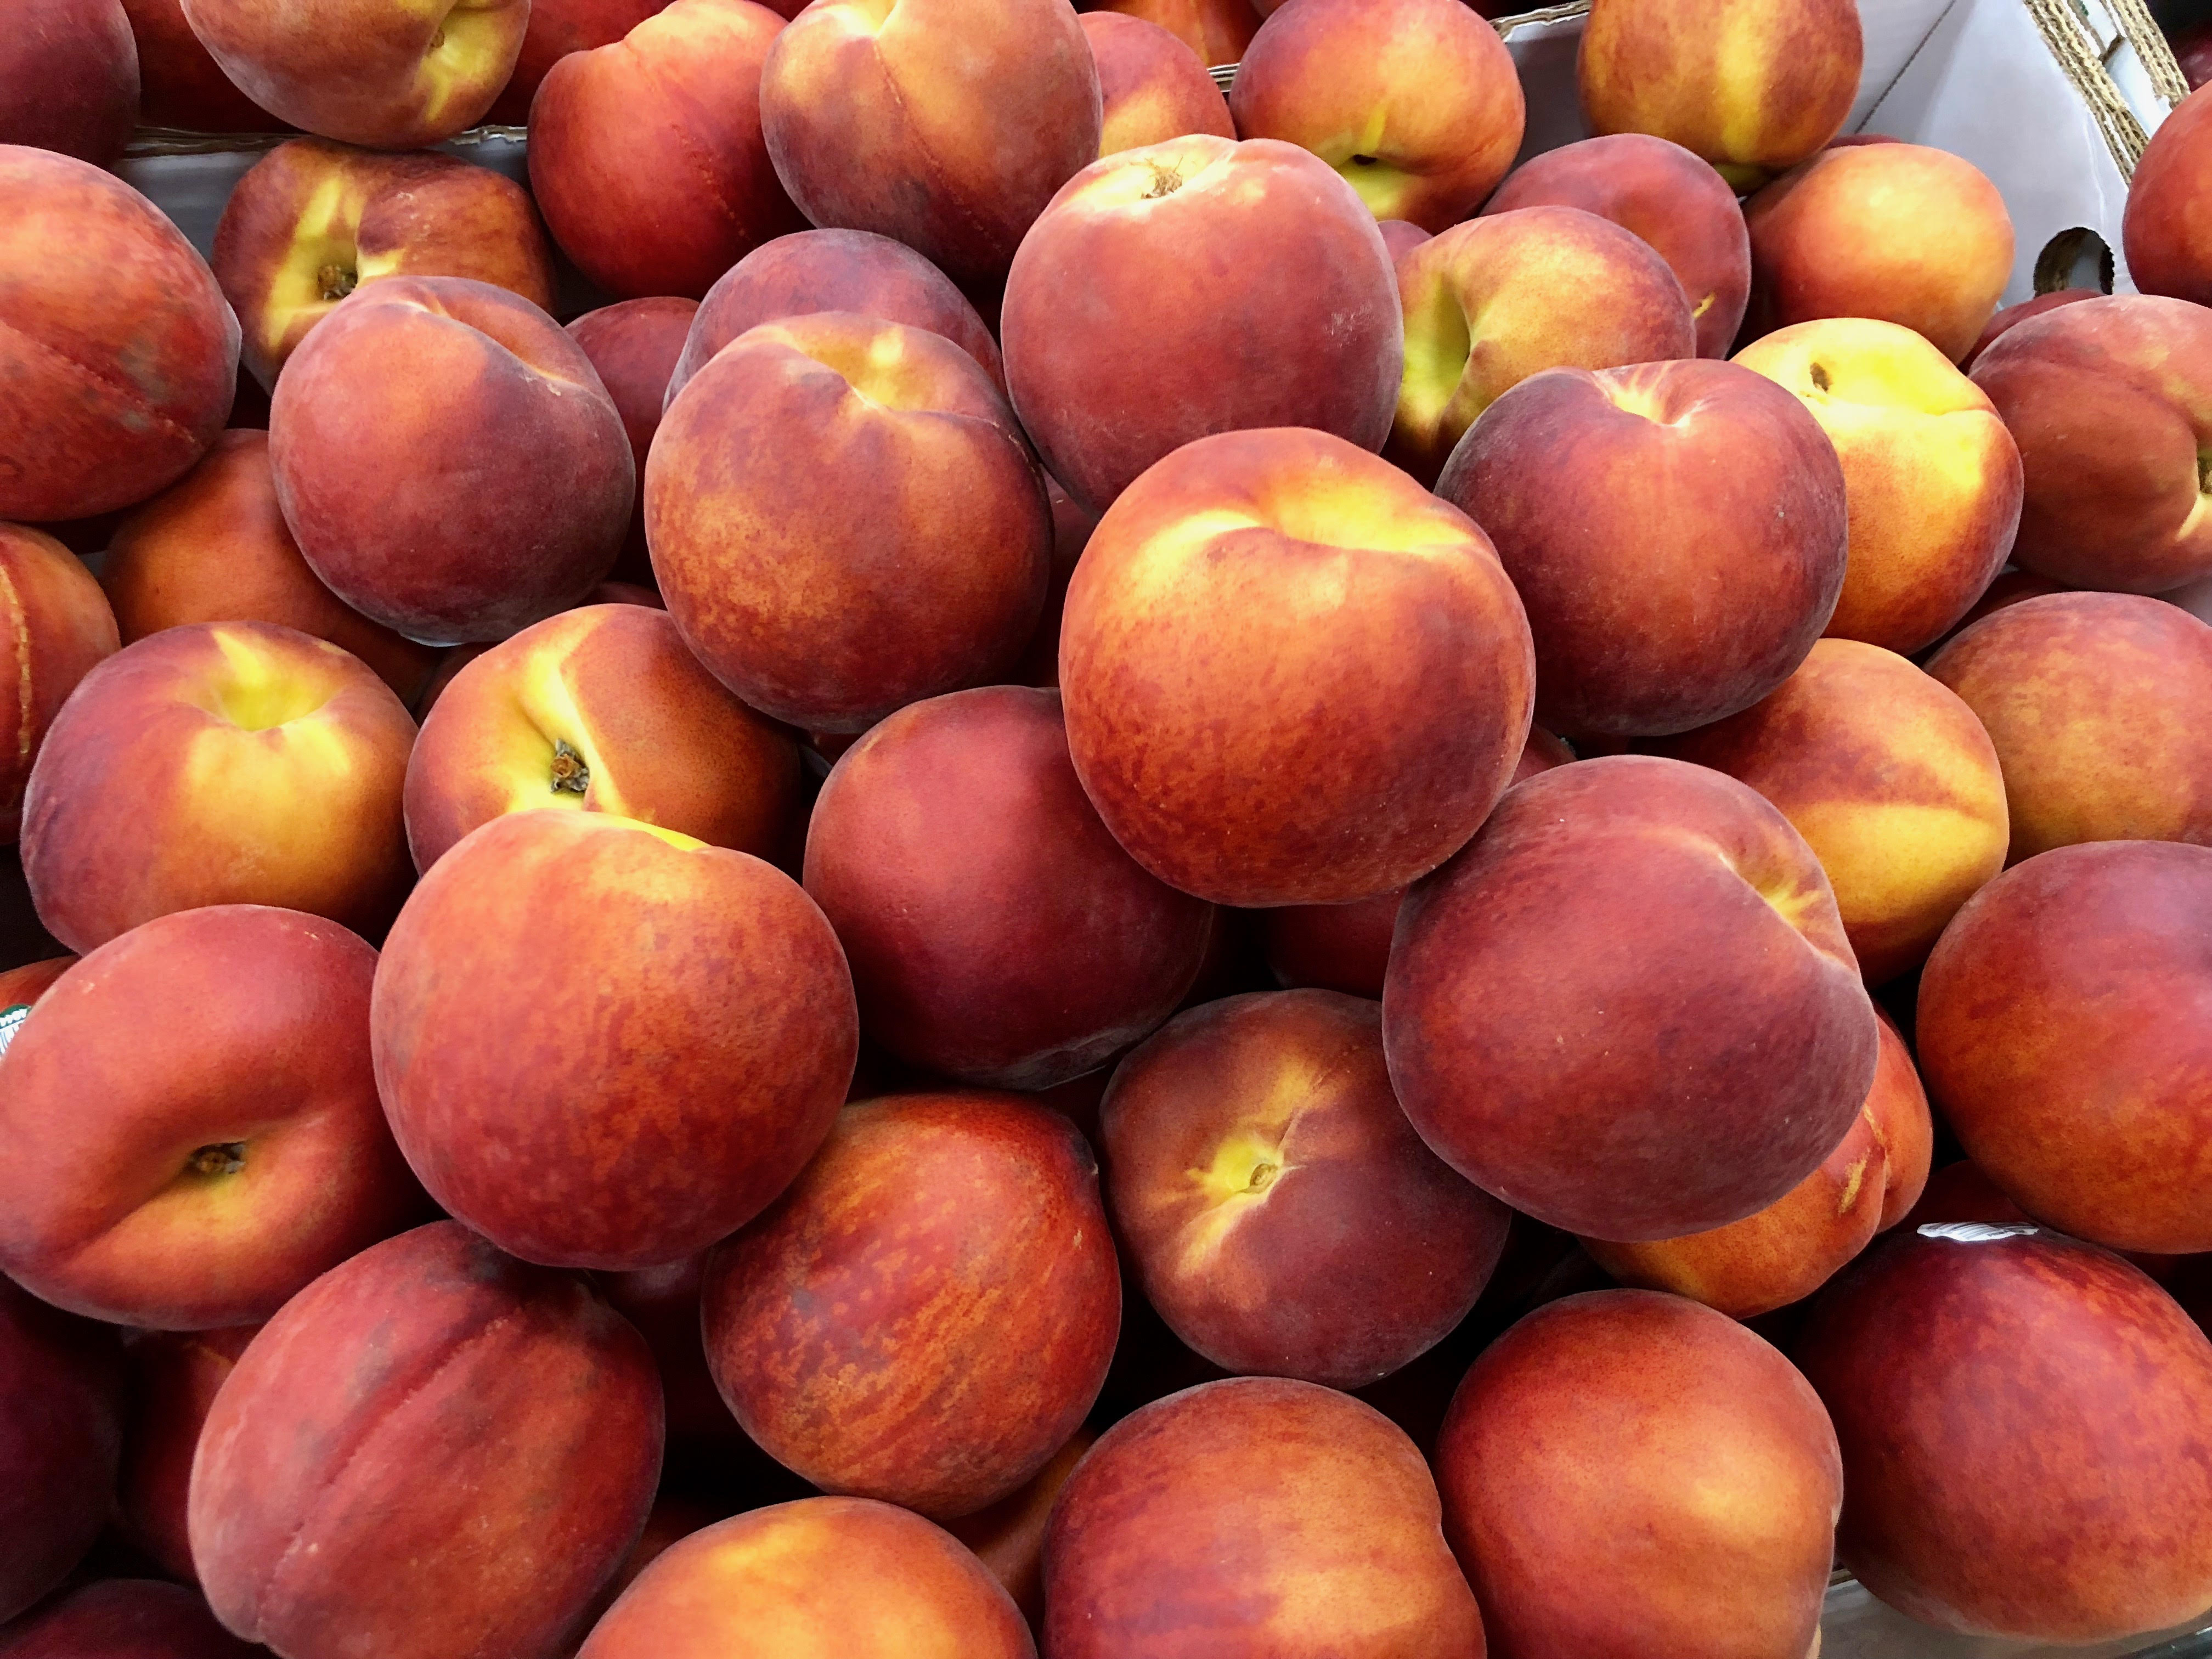 Peaches piled up